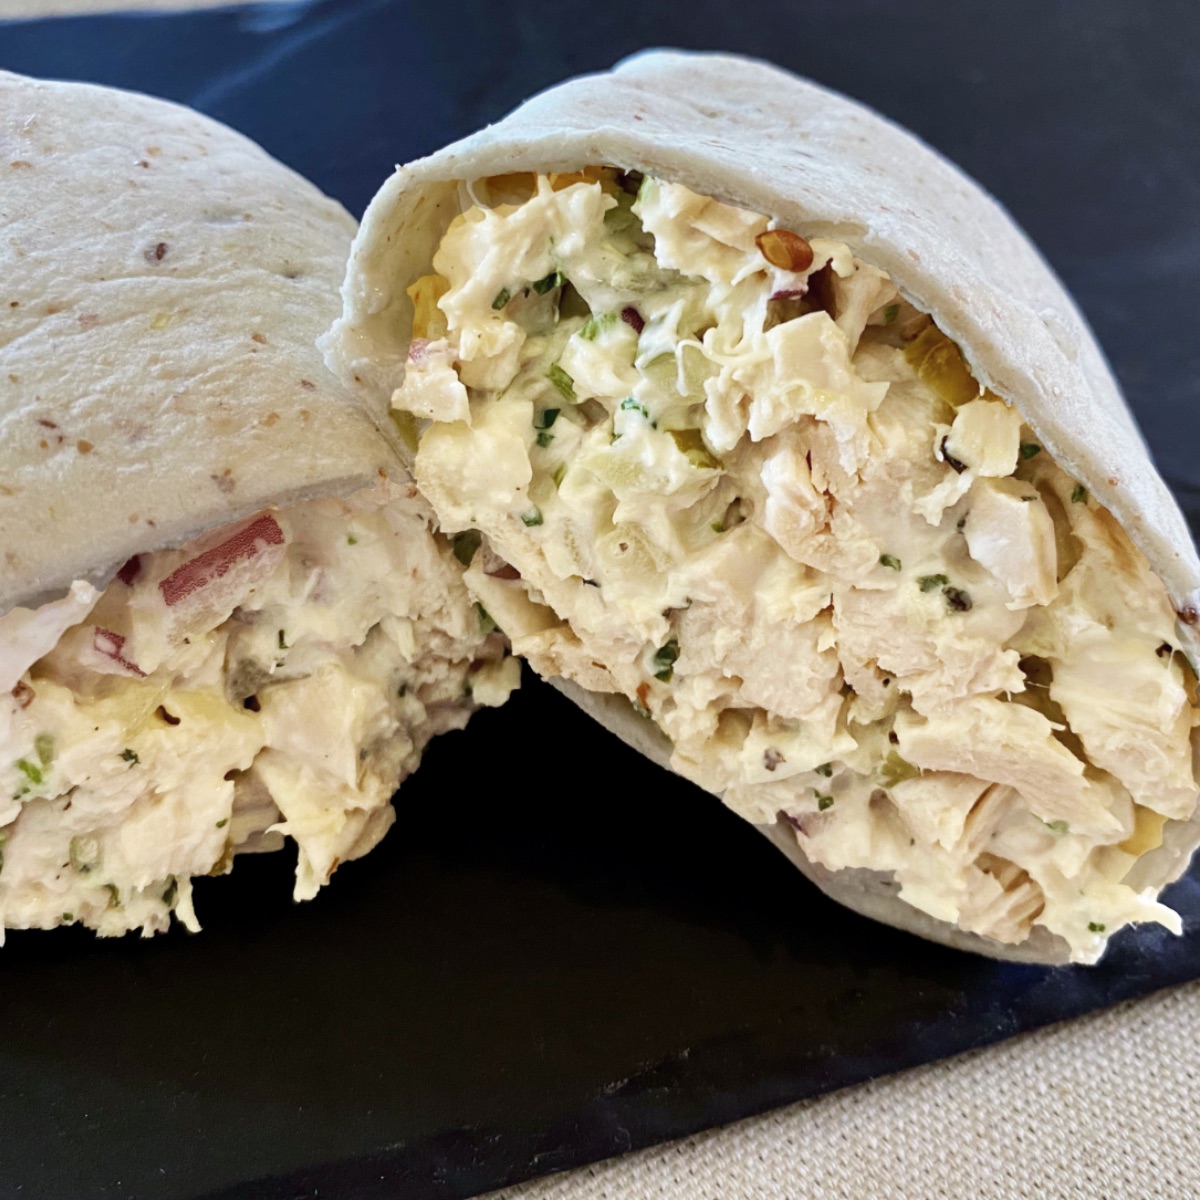 Close up view of a wrap of chicken salad with relish that has been cut in half. A view of the inside both halves of the wrap is shown.